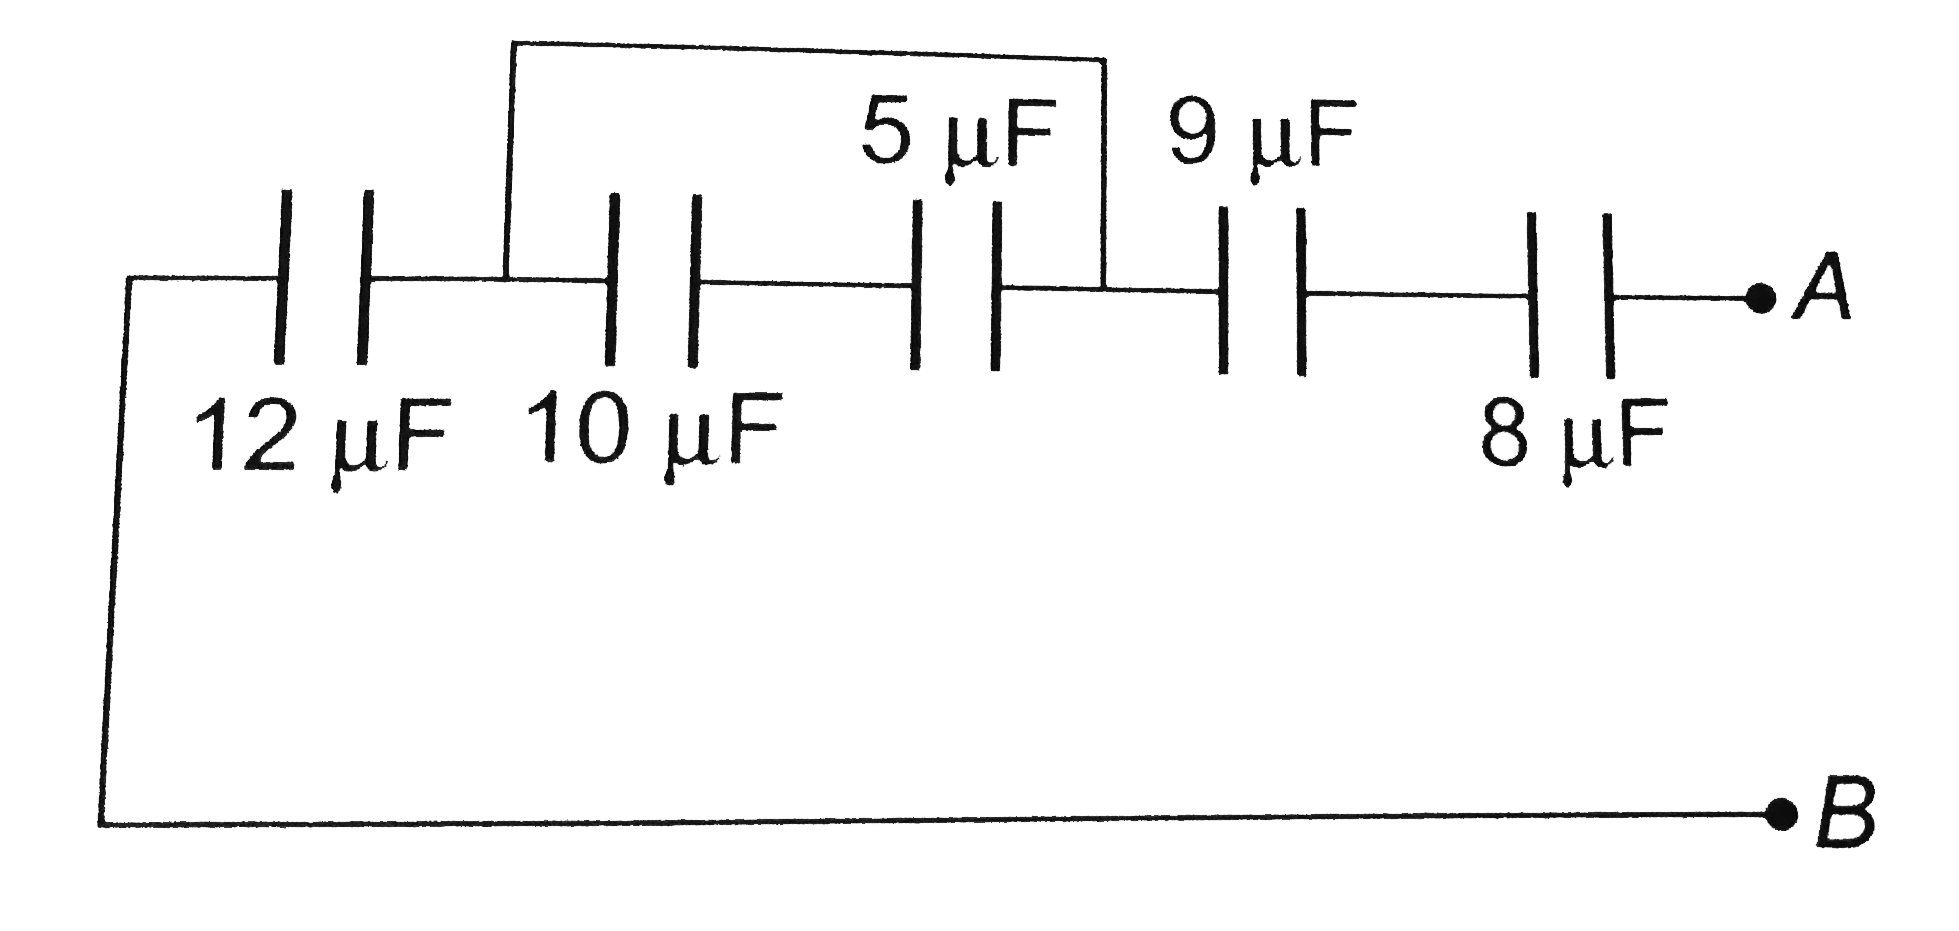 The capacities and connection of five capacitors are shown in the adjoining figure. The potential difference between the points A and B is 60 volts. Then the equivalent capacity between A and B and the charge on 5 muF capacitance will be respectively